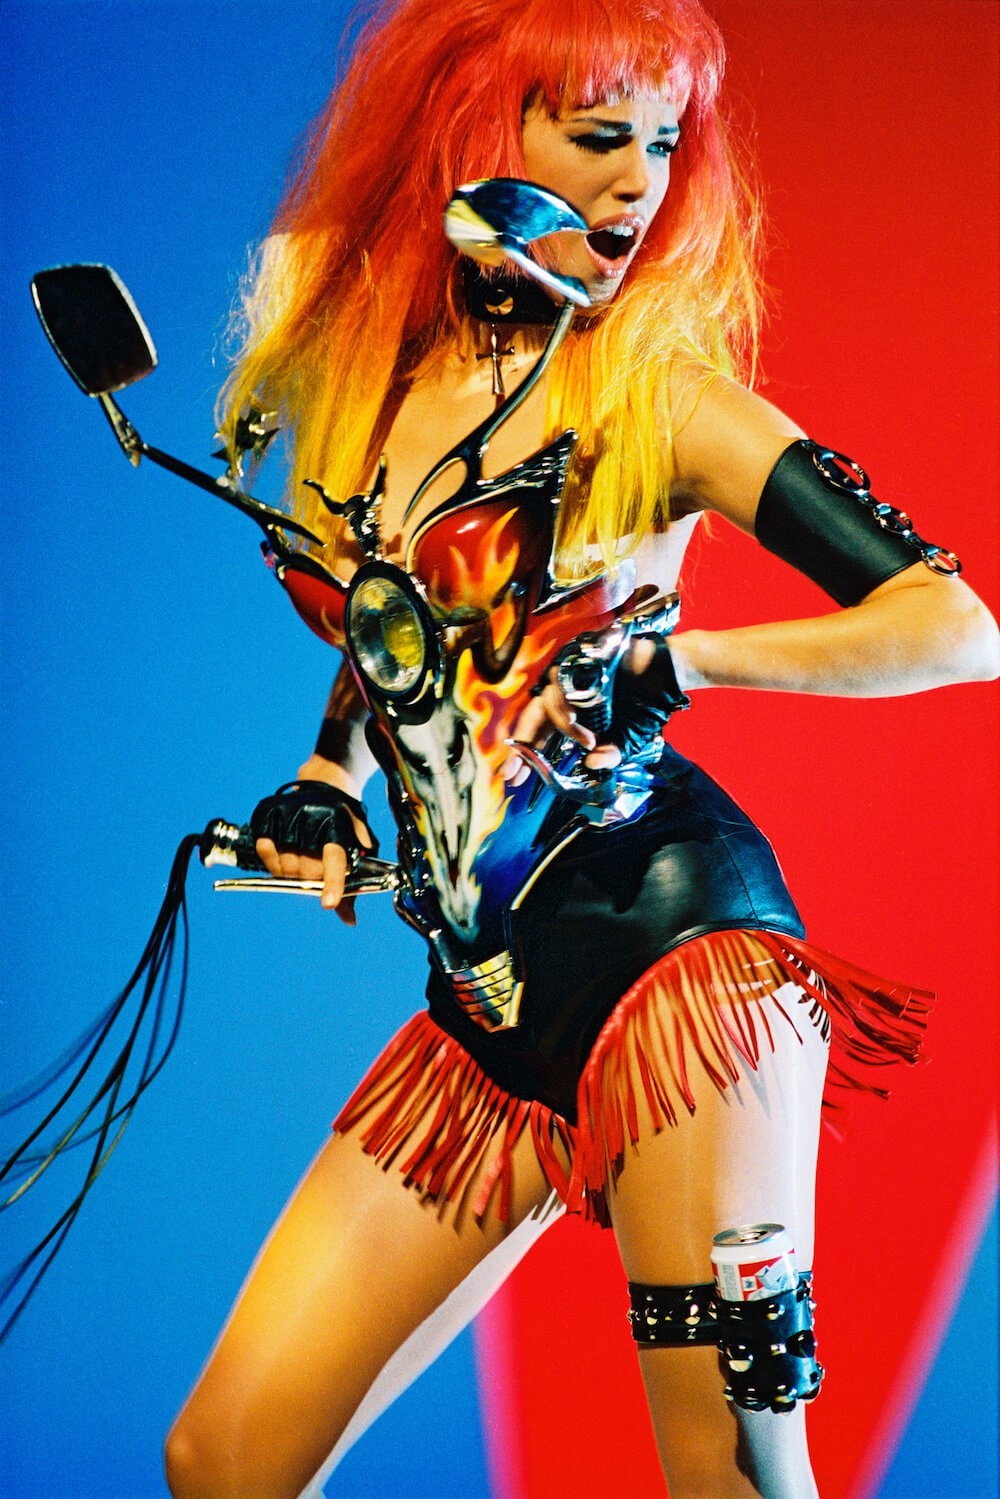 A brief history of Thierry Mugler's high-voltage fashion